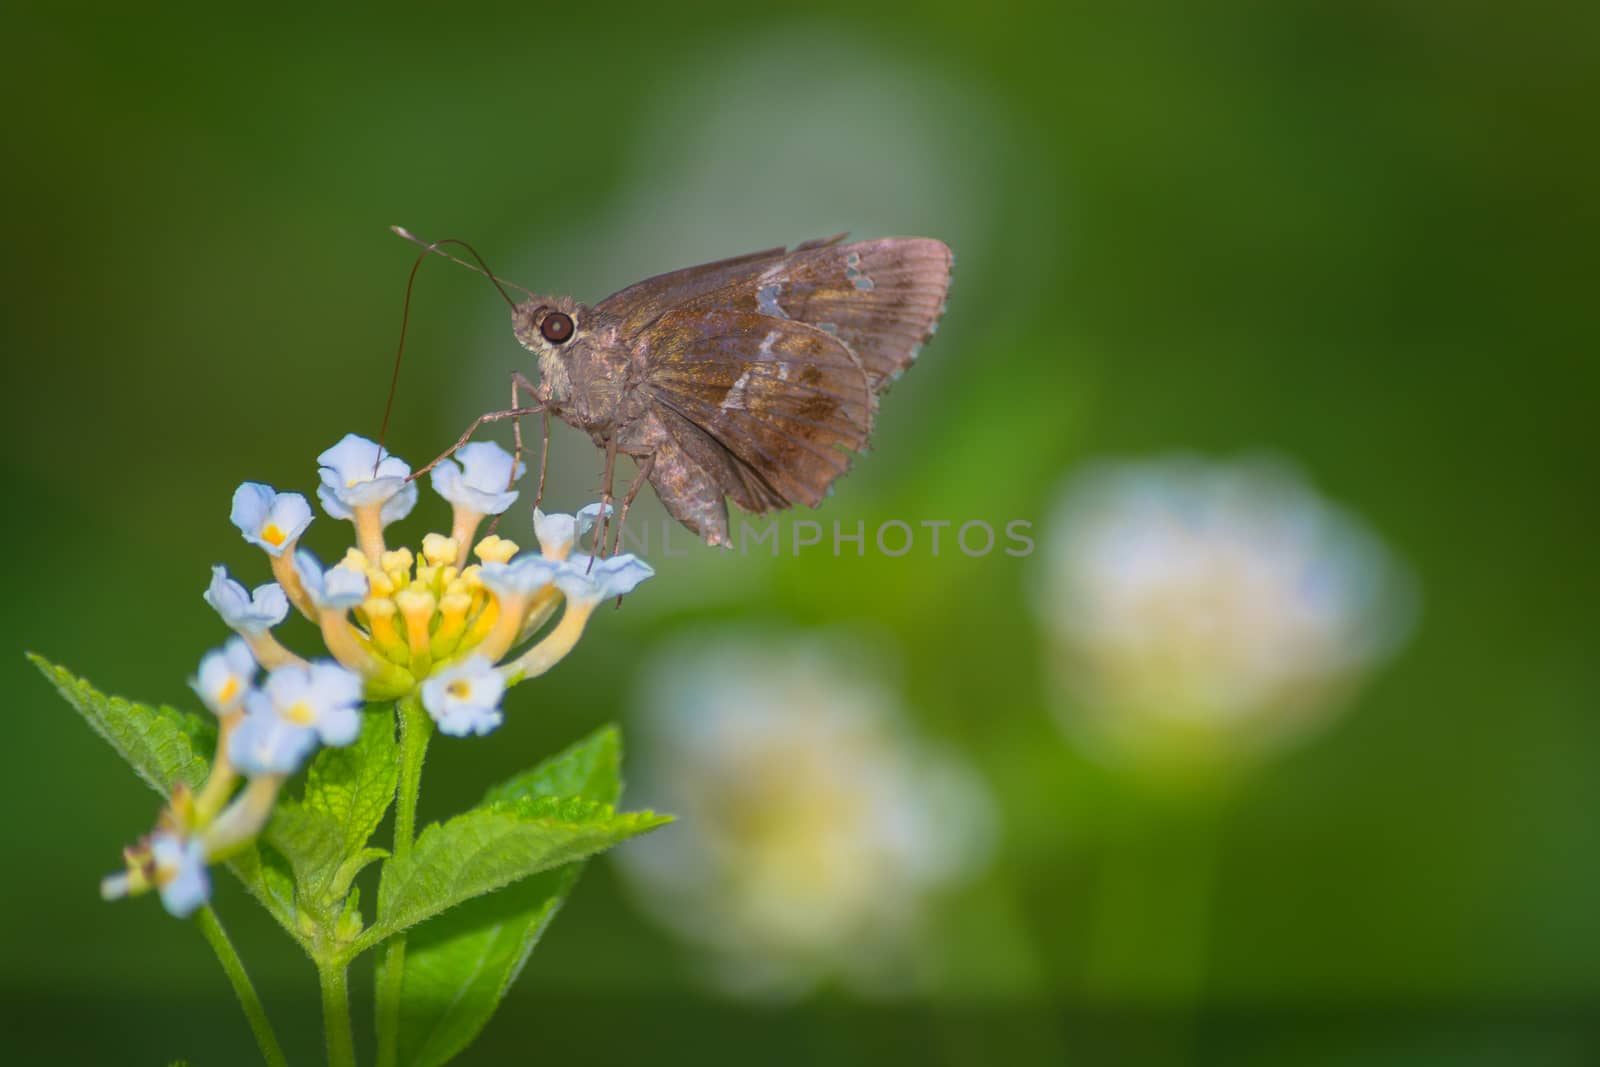 A small butter on lantana flower against blur background.